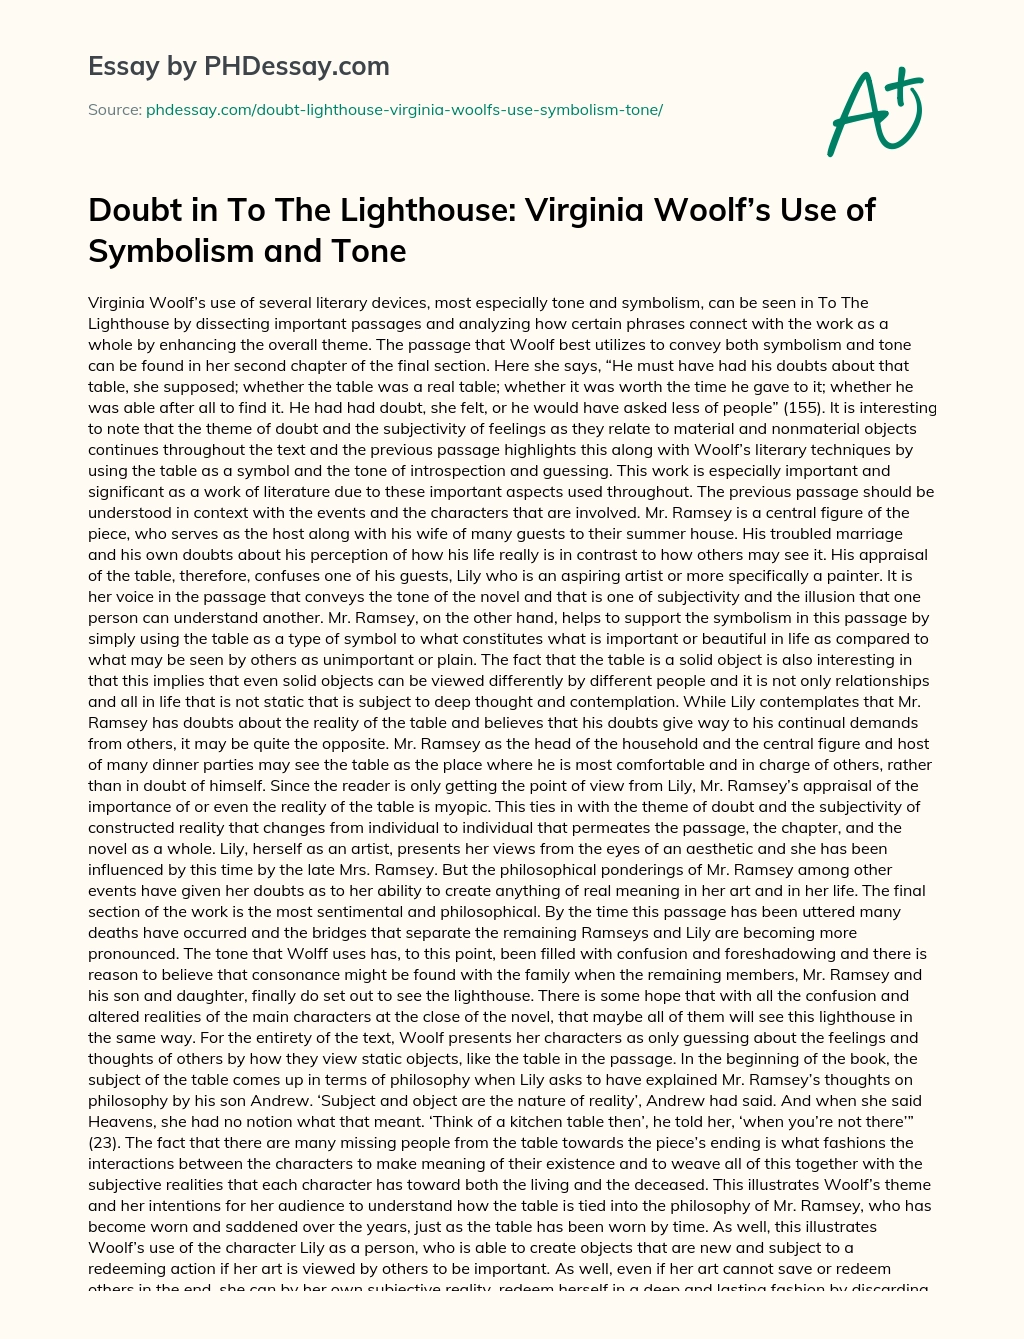 Doubt in To The Lighthouse:  Virginia Woolf’s Use of Symbolism and Tone essay